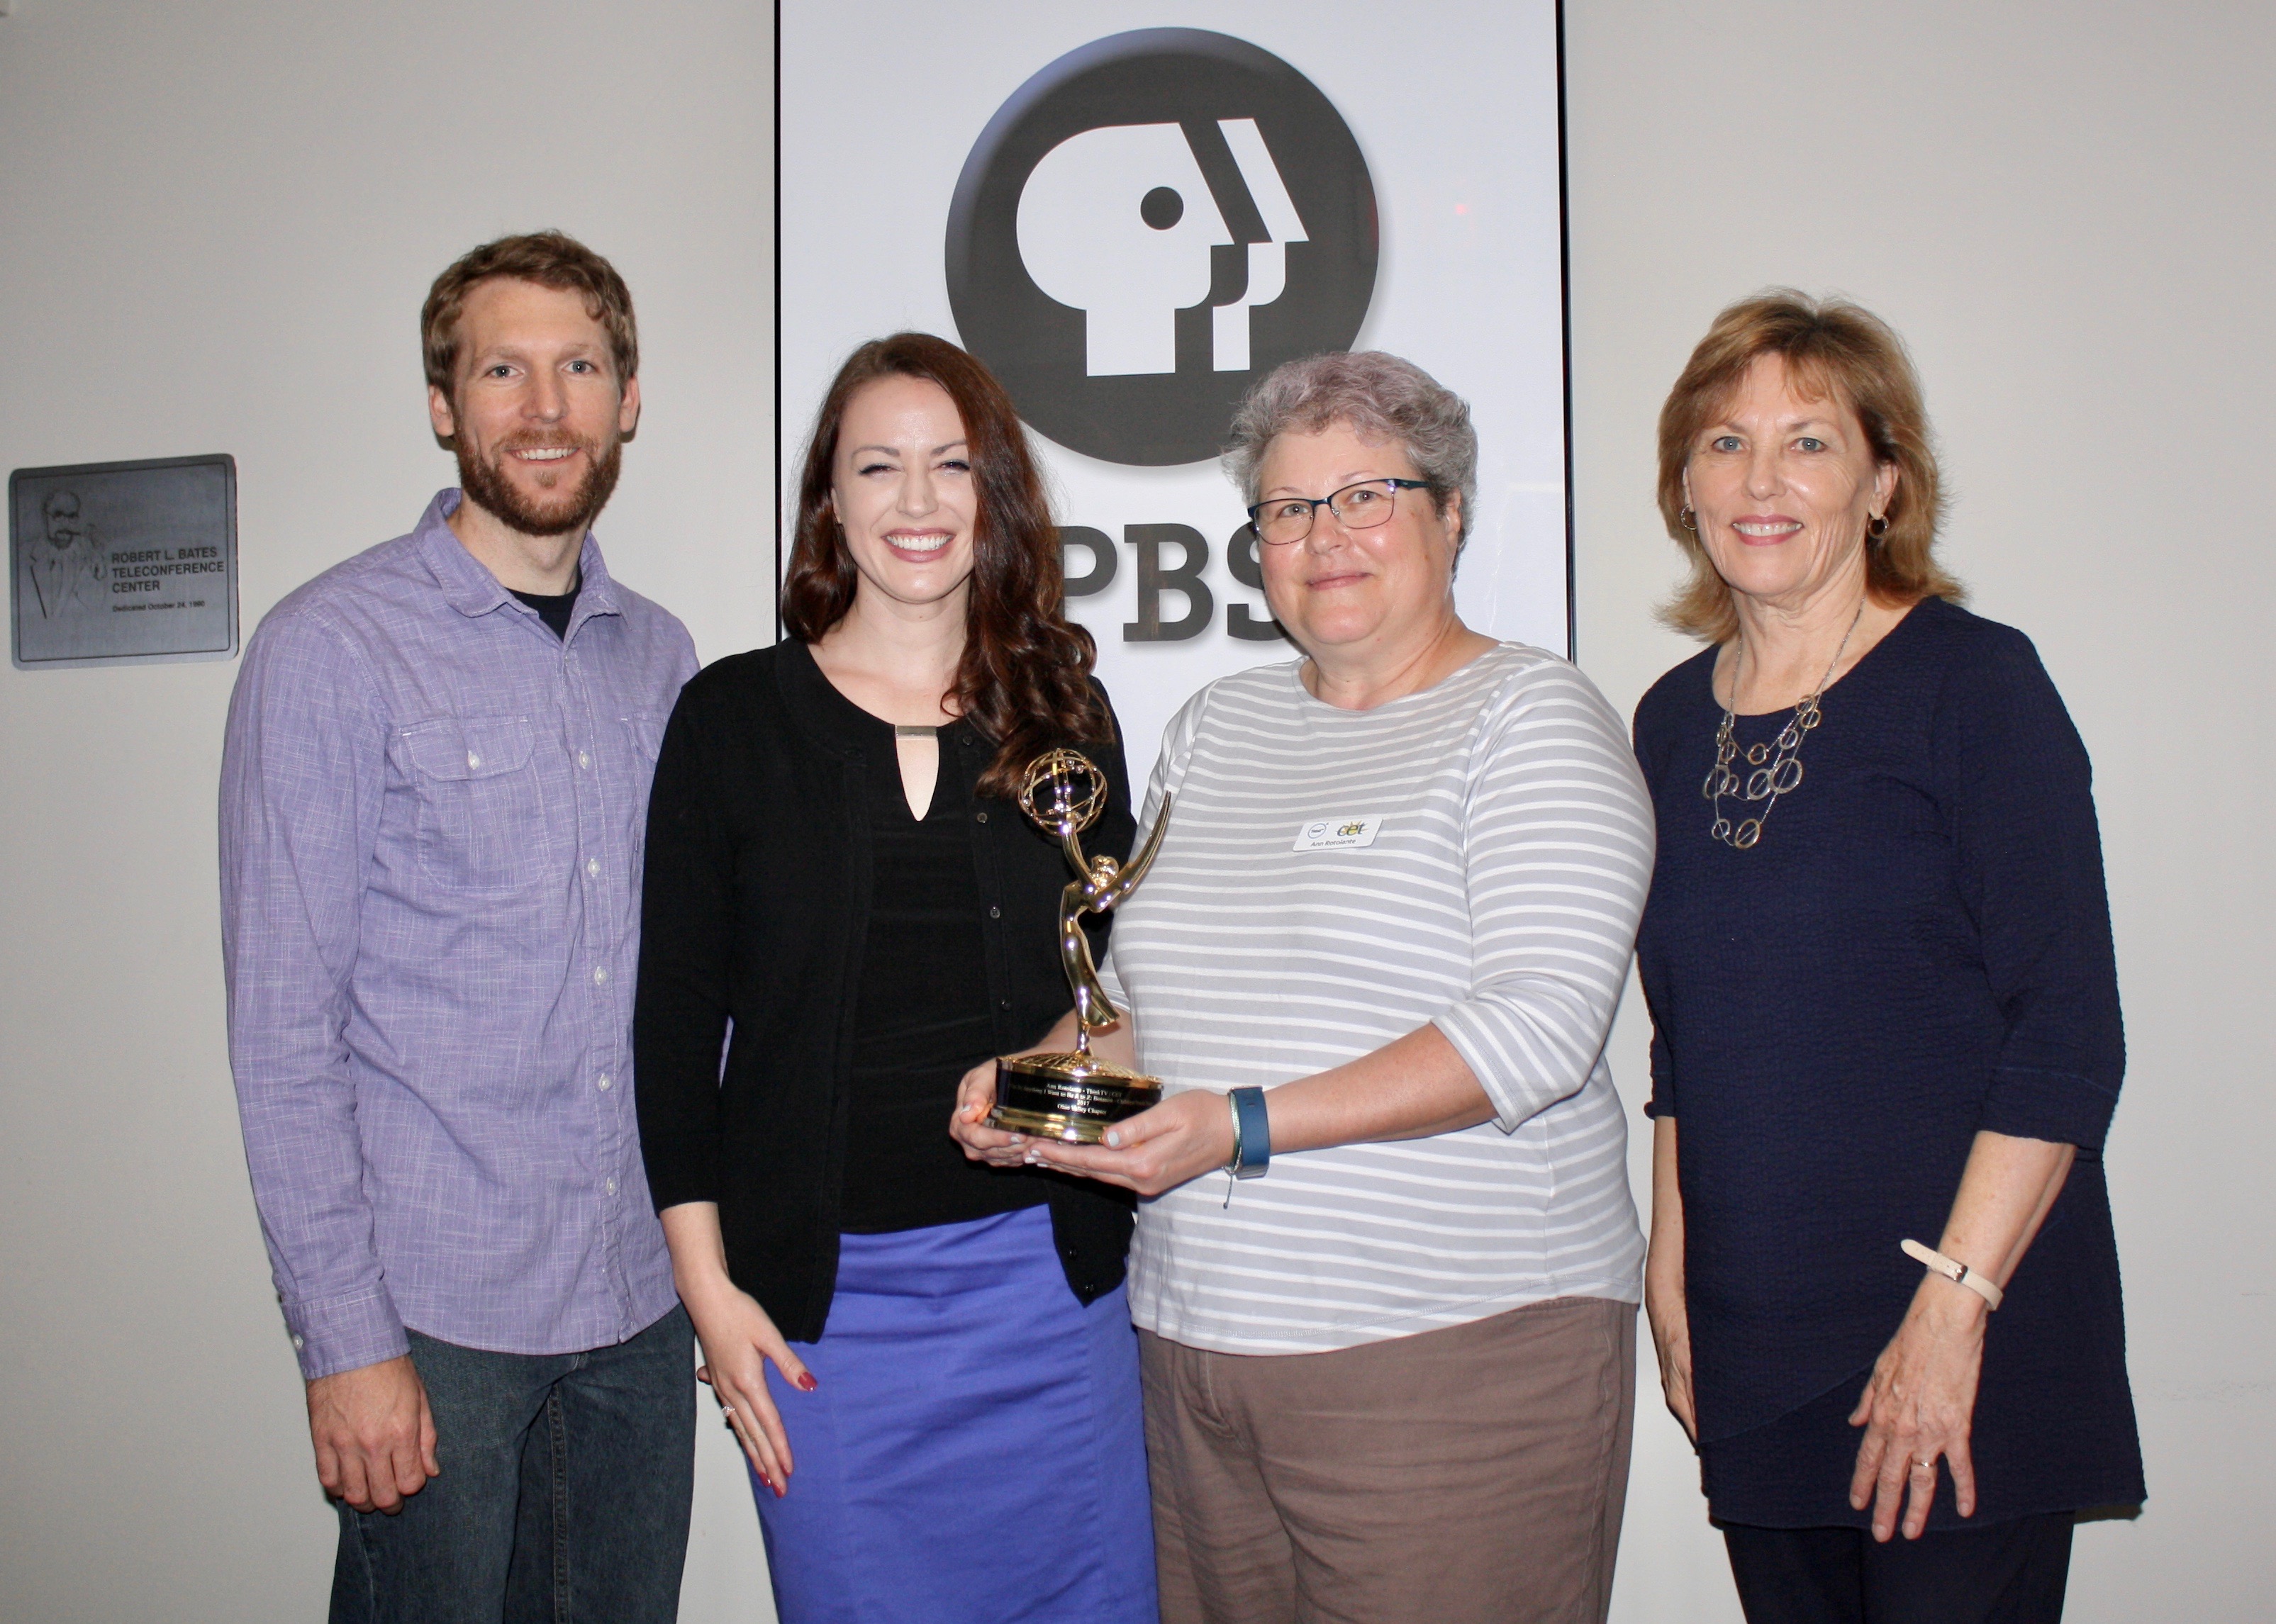 Katie Wright with the Emmy Award-winning producers of the show “I Can be Anything I Want to Be, A to Z."